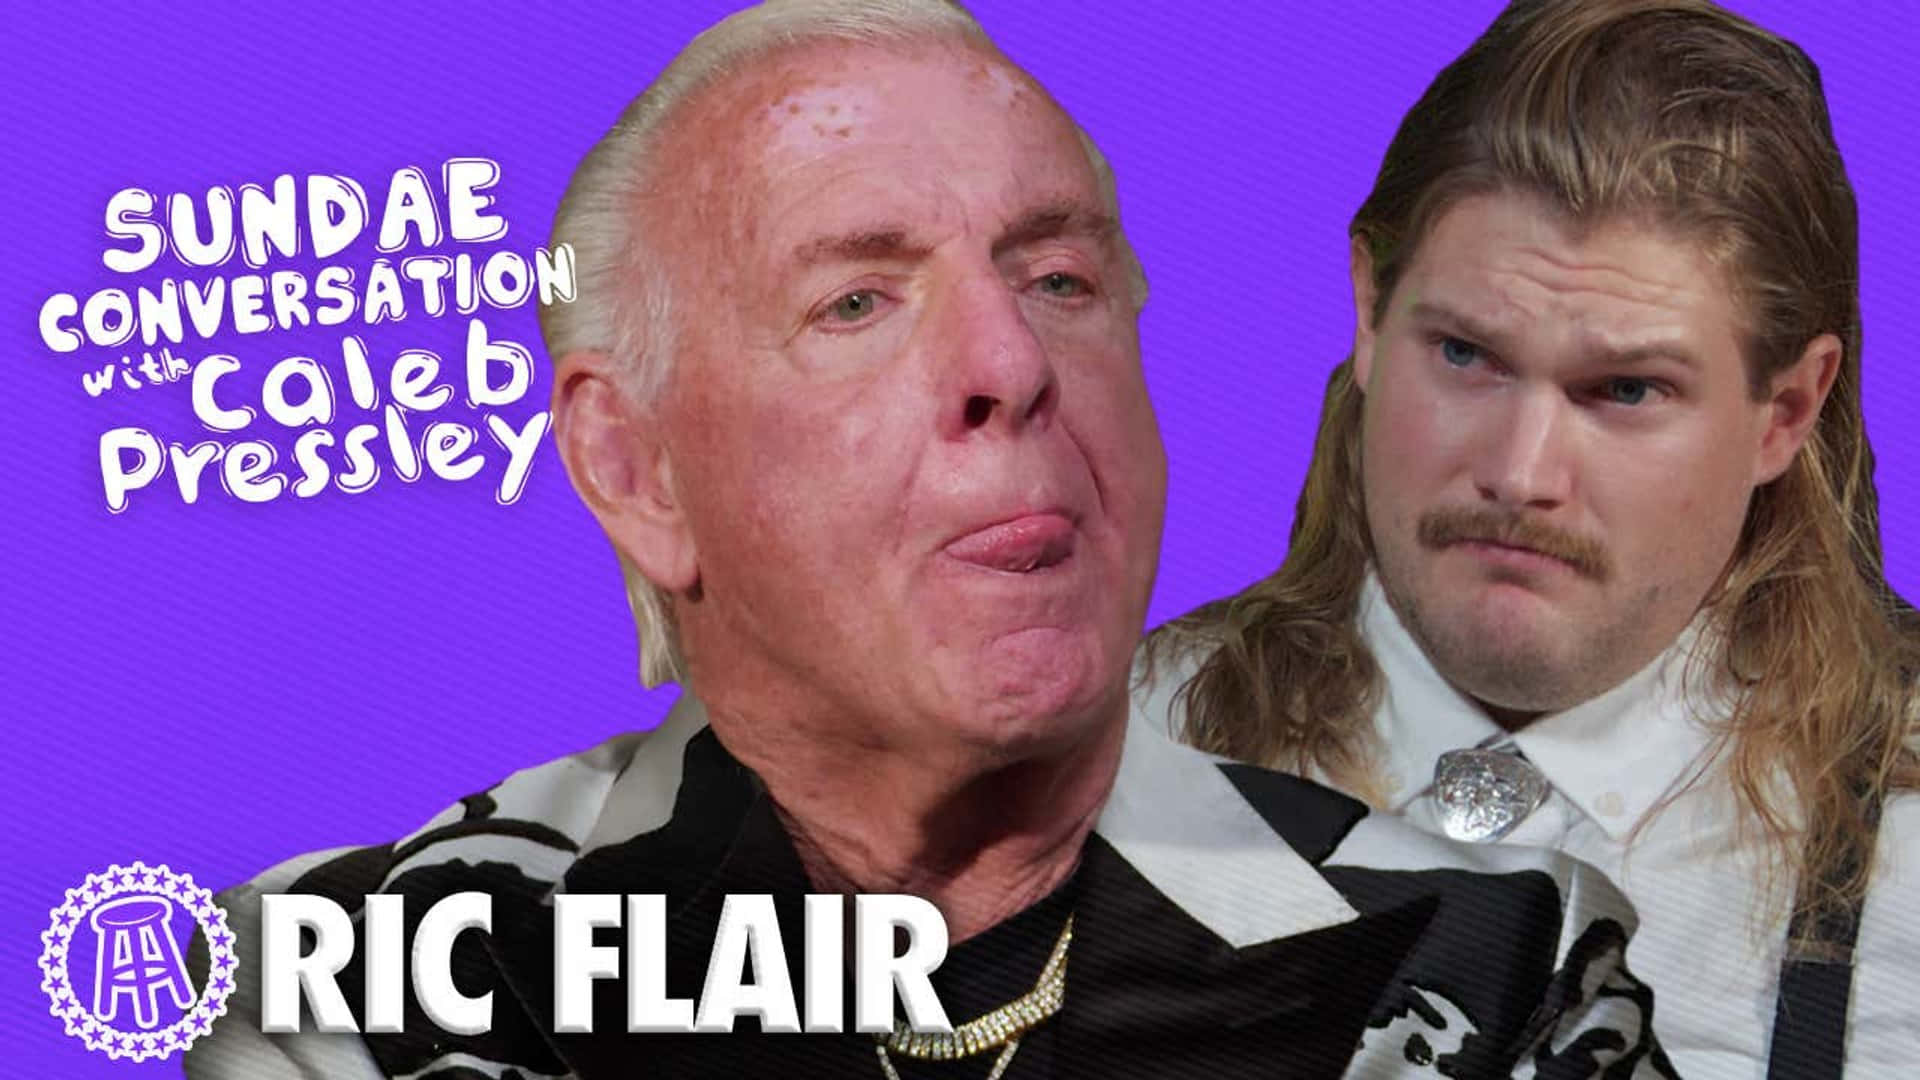 Ric Flair In Conversation With Caleb Pressley Background